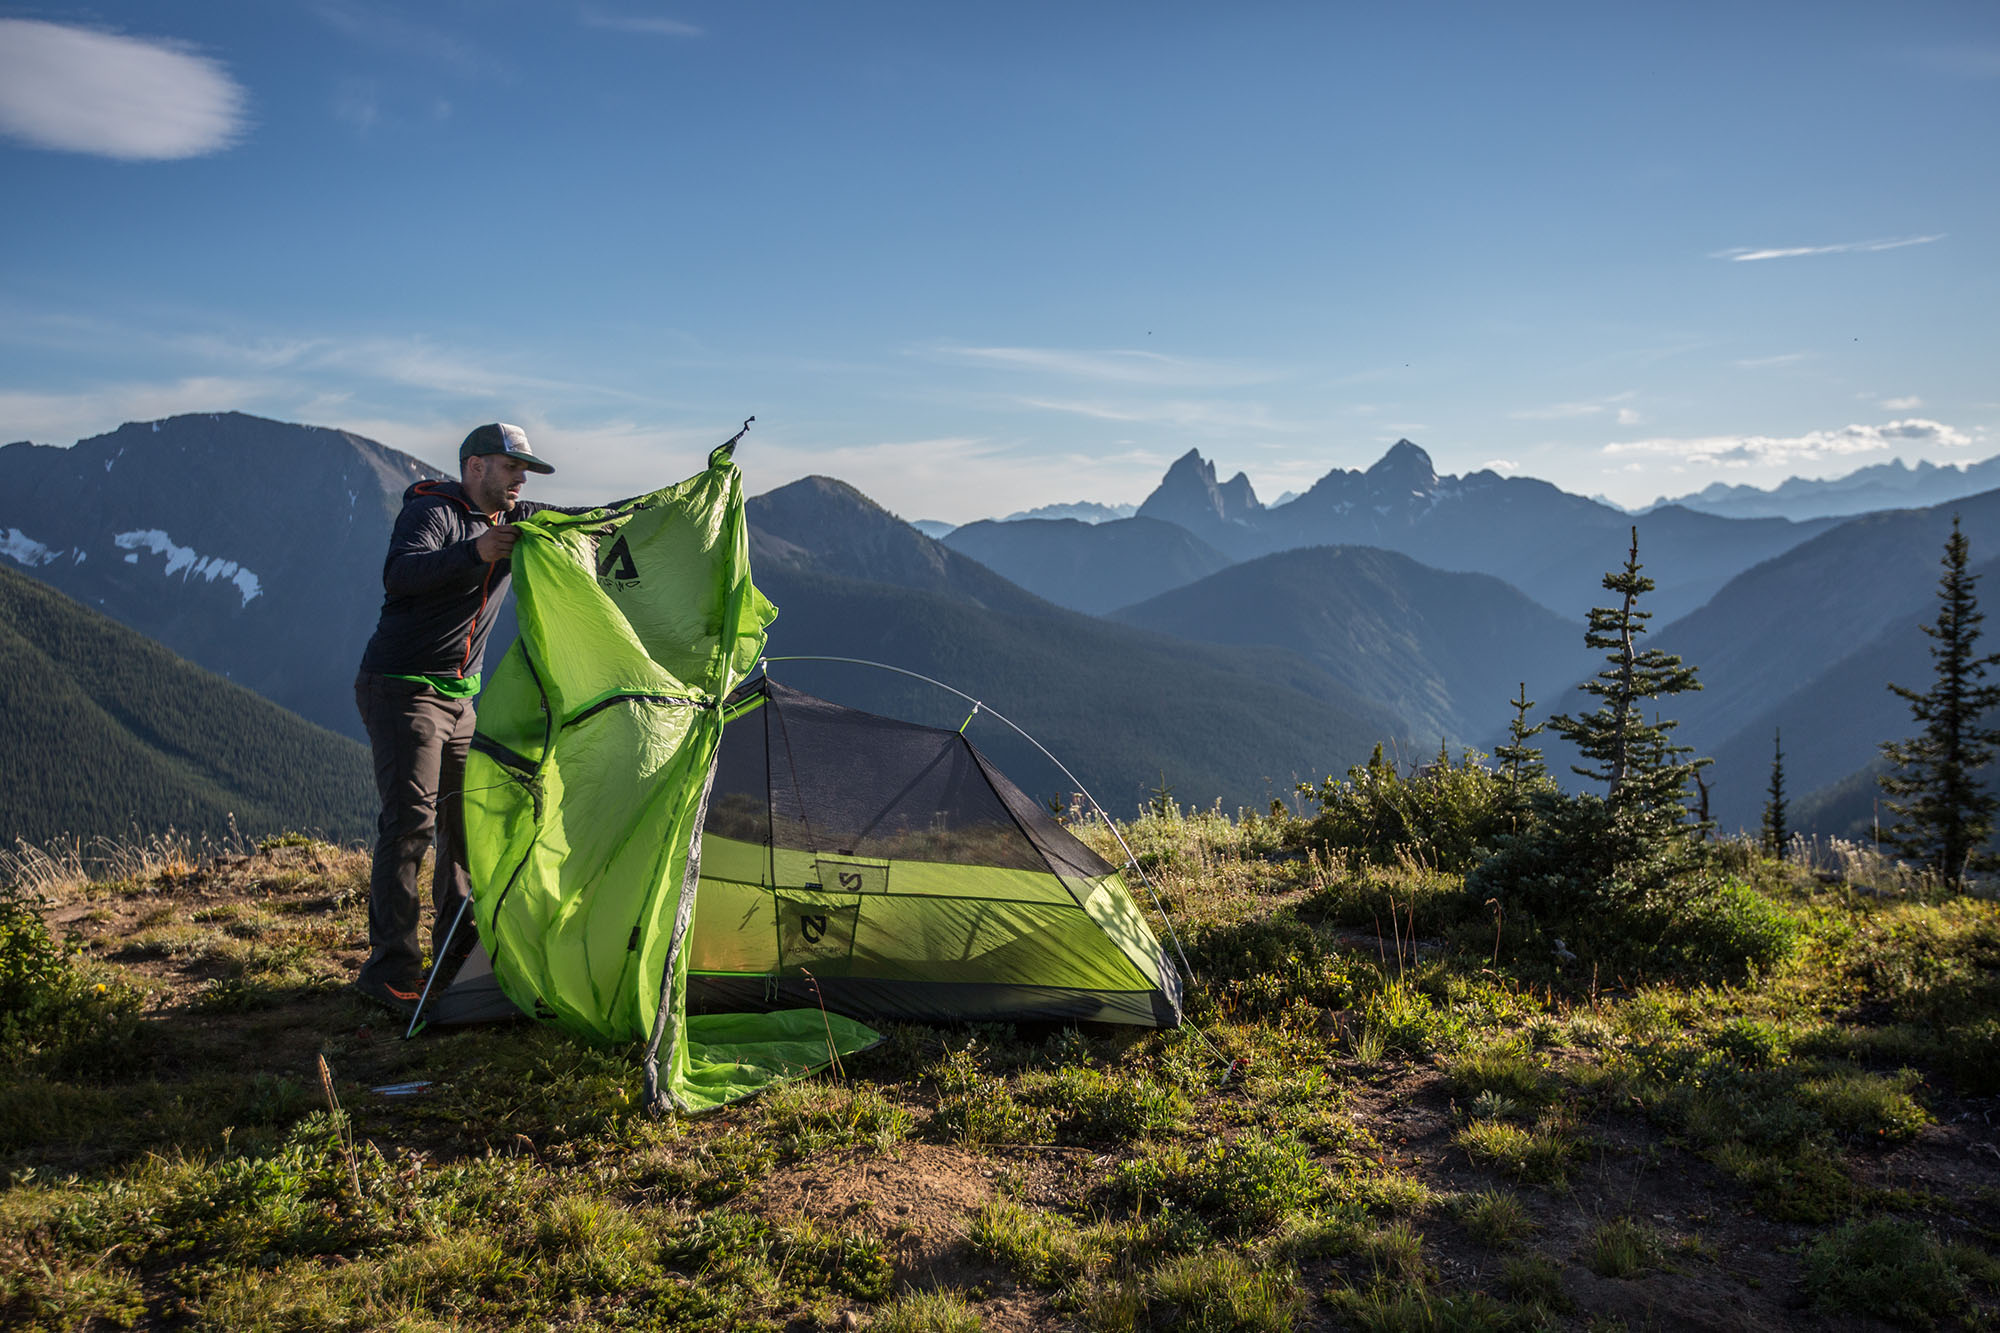 Backpacking tent (setting up the Nemo Hornet 2P)